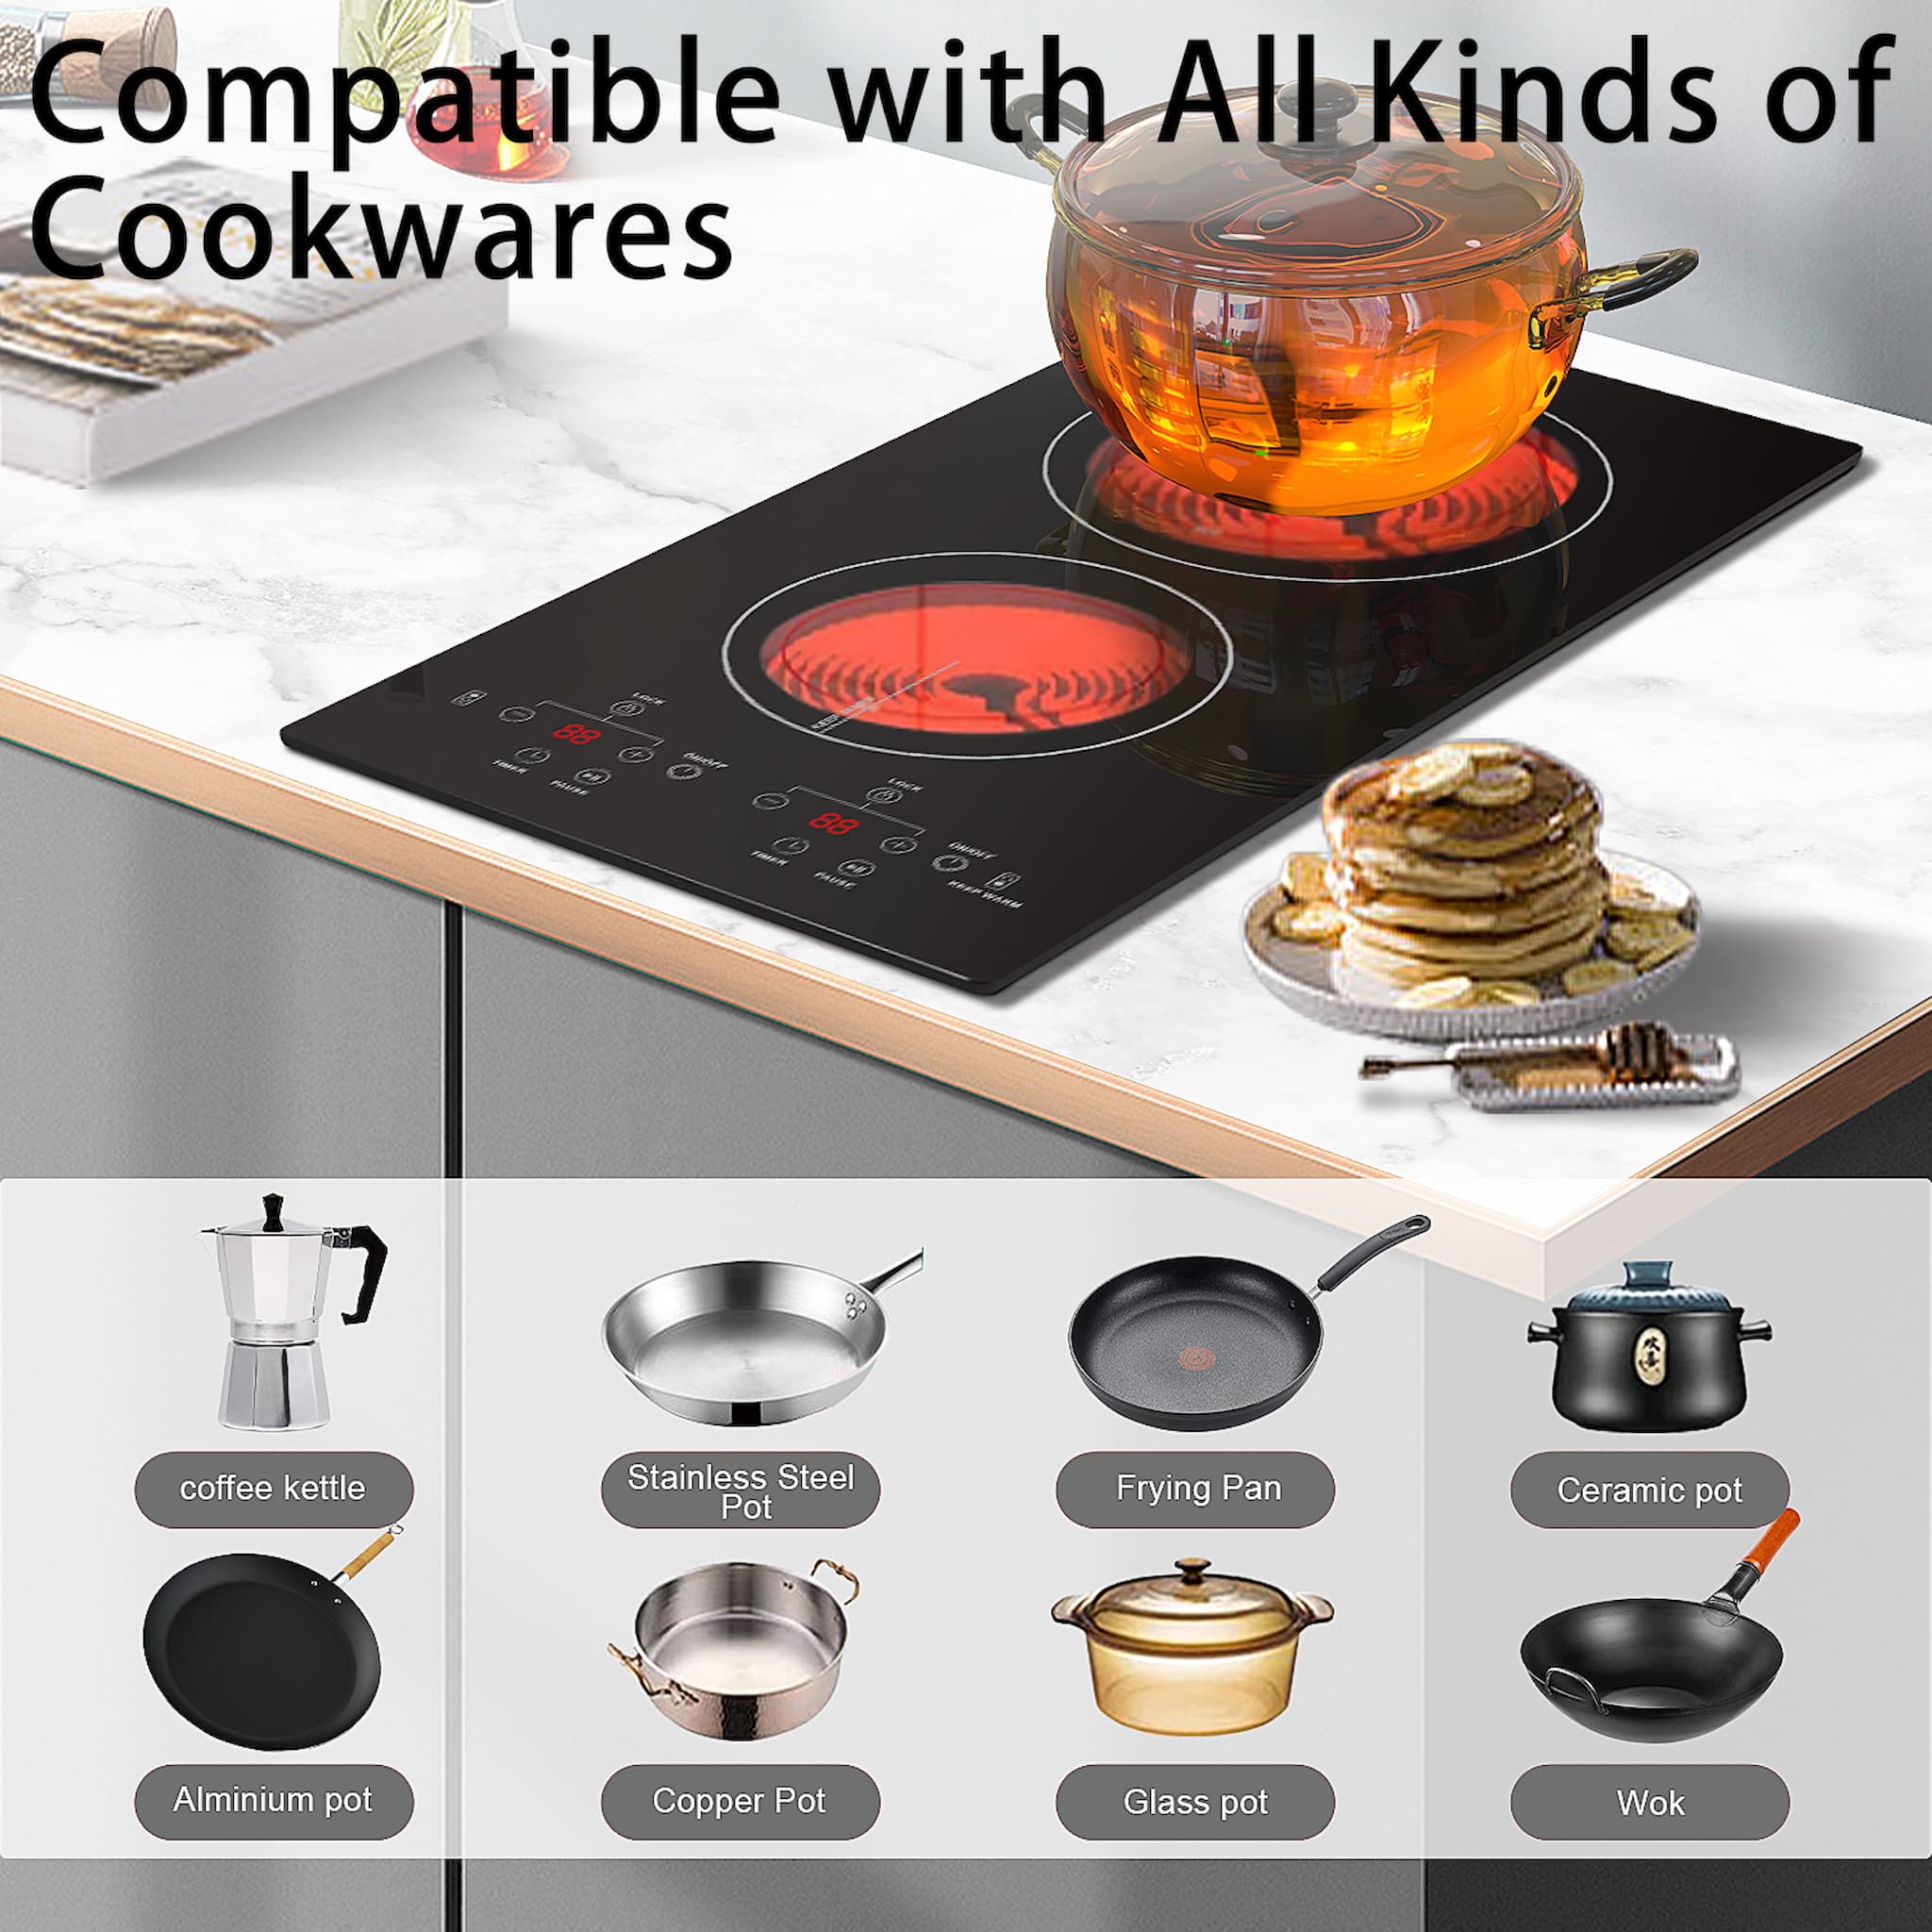 Cooksir Portable Electric Cooktop 2 Burner, 110V Plug in Electric Stovetop  with Protective Full Metal Edge, 12 Inch Countertop & Built-in Ceramic